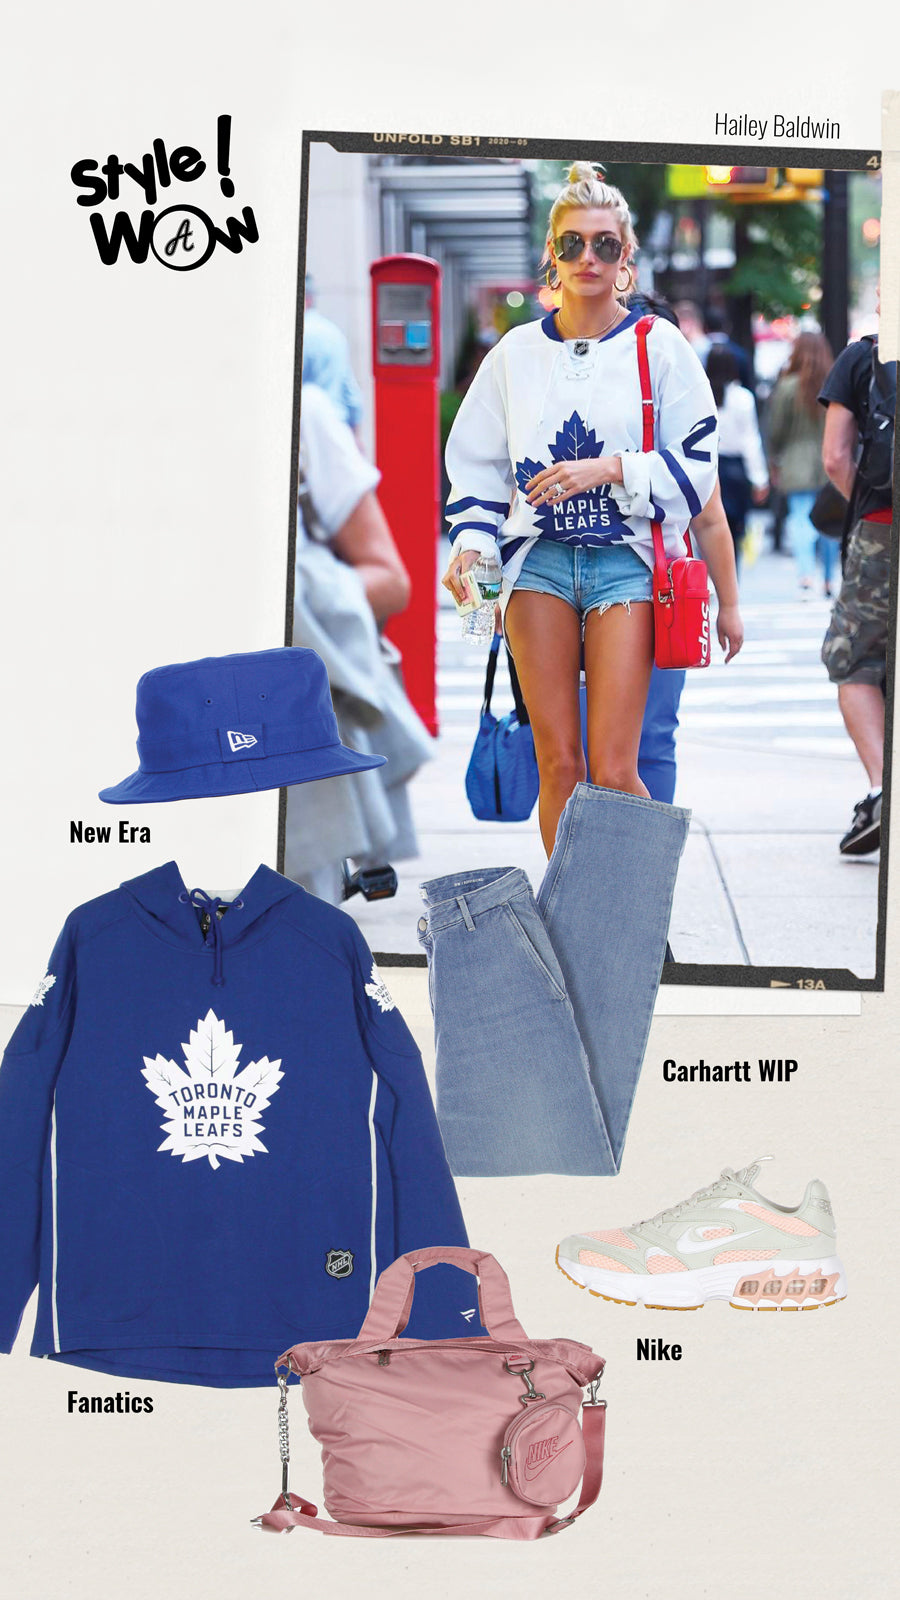 Street outfit inspired by the style of Hailey Bieber wearing an NHL game jersey, consisting of a blue hoodie from the Toronto Maple Leafs hockey team, long light blue jeans, a blue New Era flat bucket hat and metallic gray Nike Air Fire running sneakers and pink